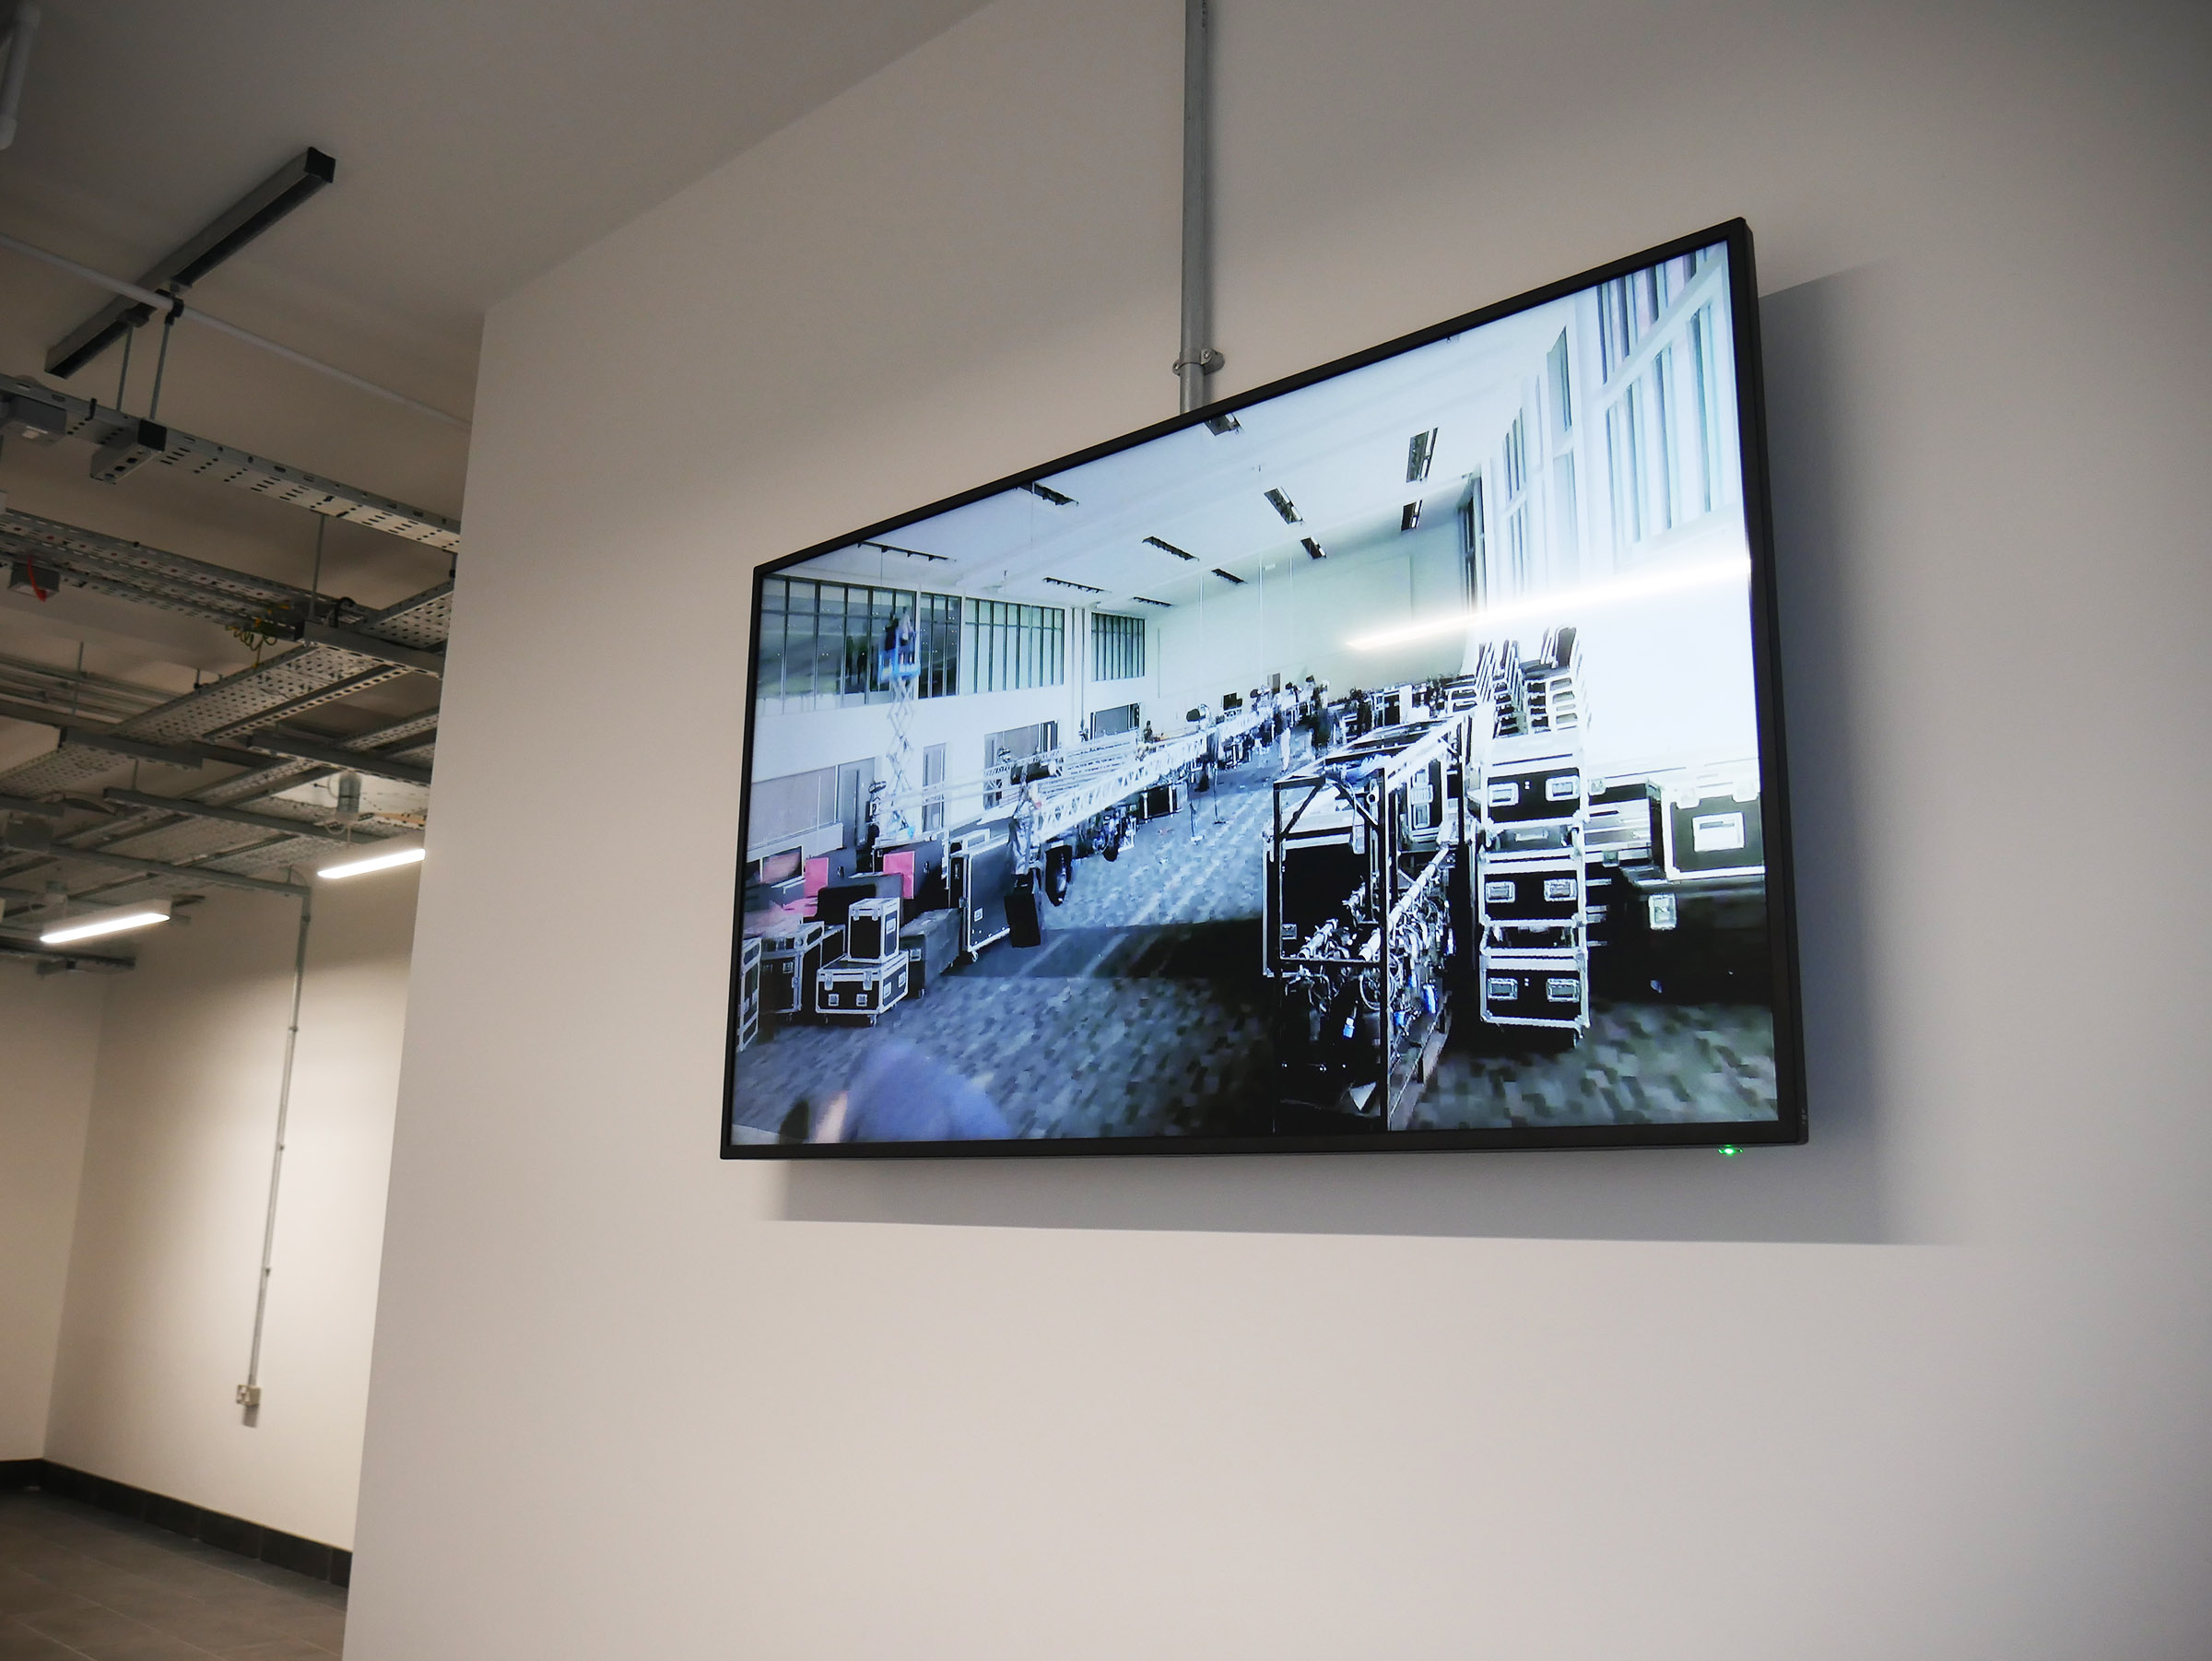 large screen on a wall of a workplace